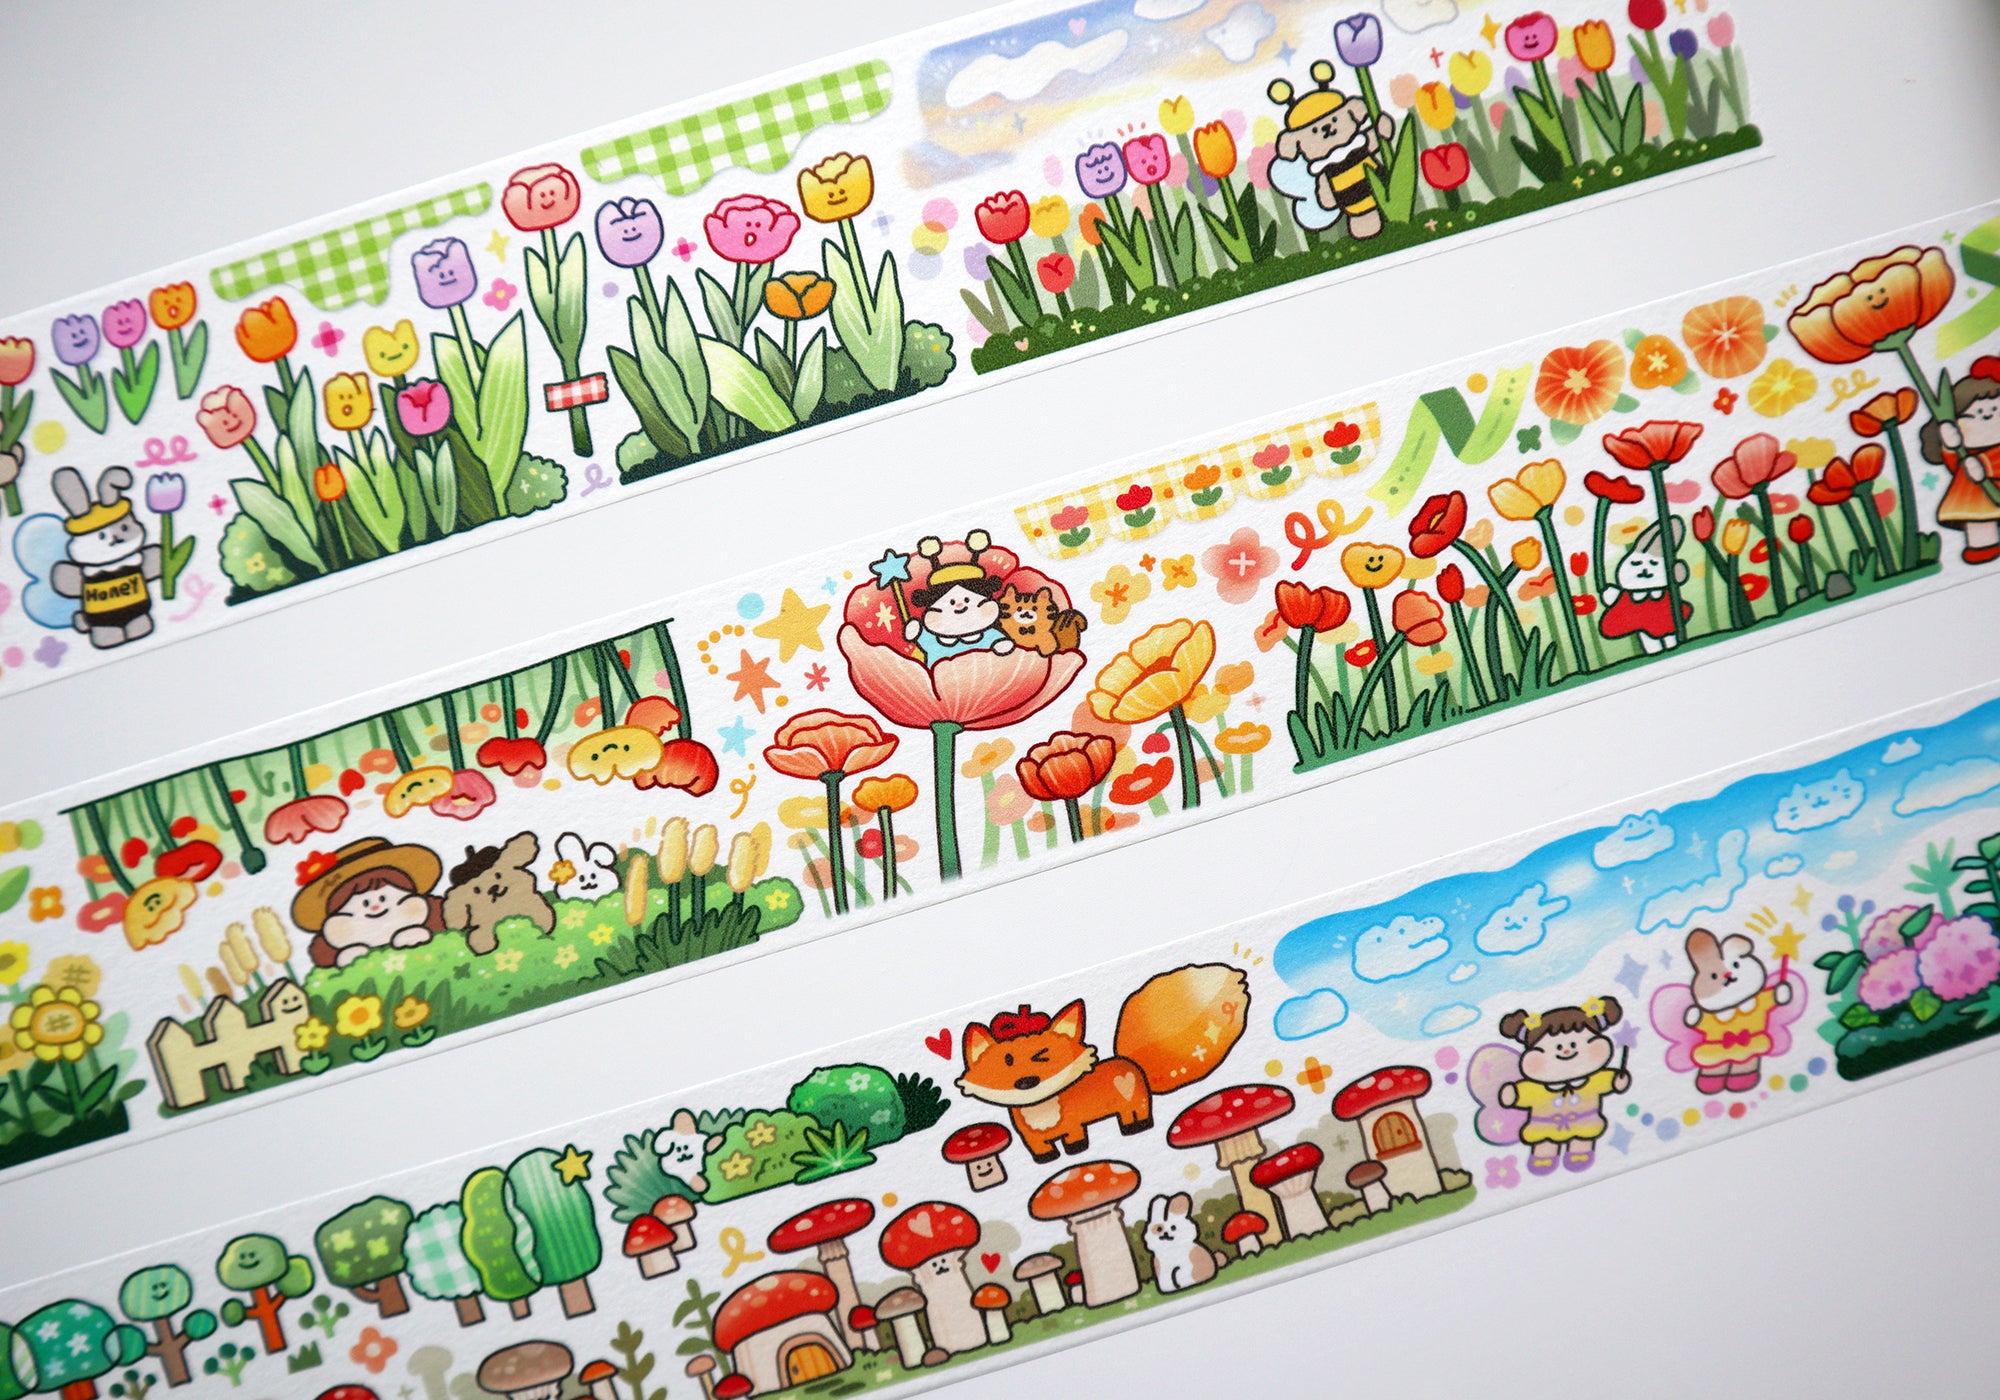 Meatball Washi Tape: Flower Patch